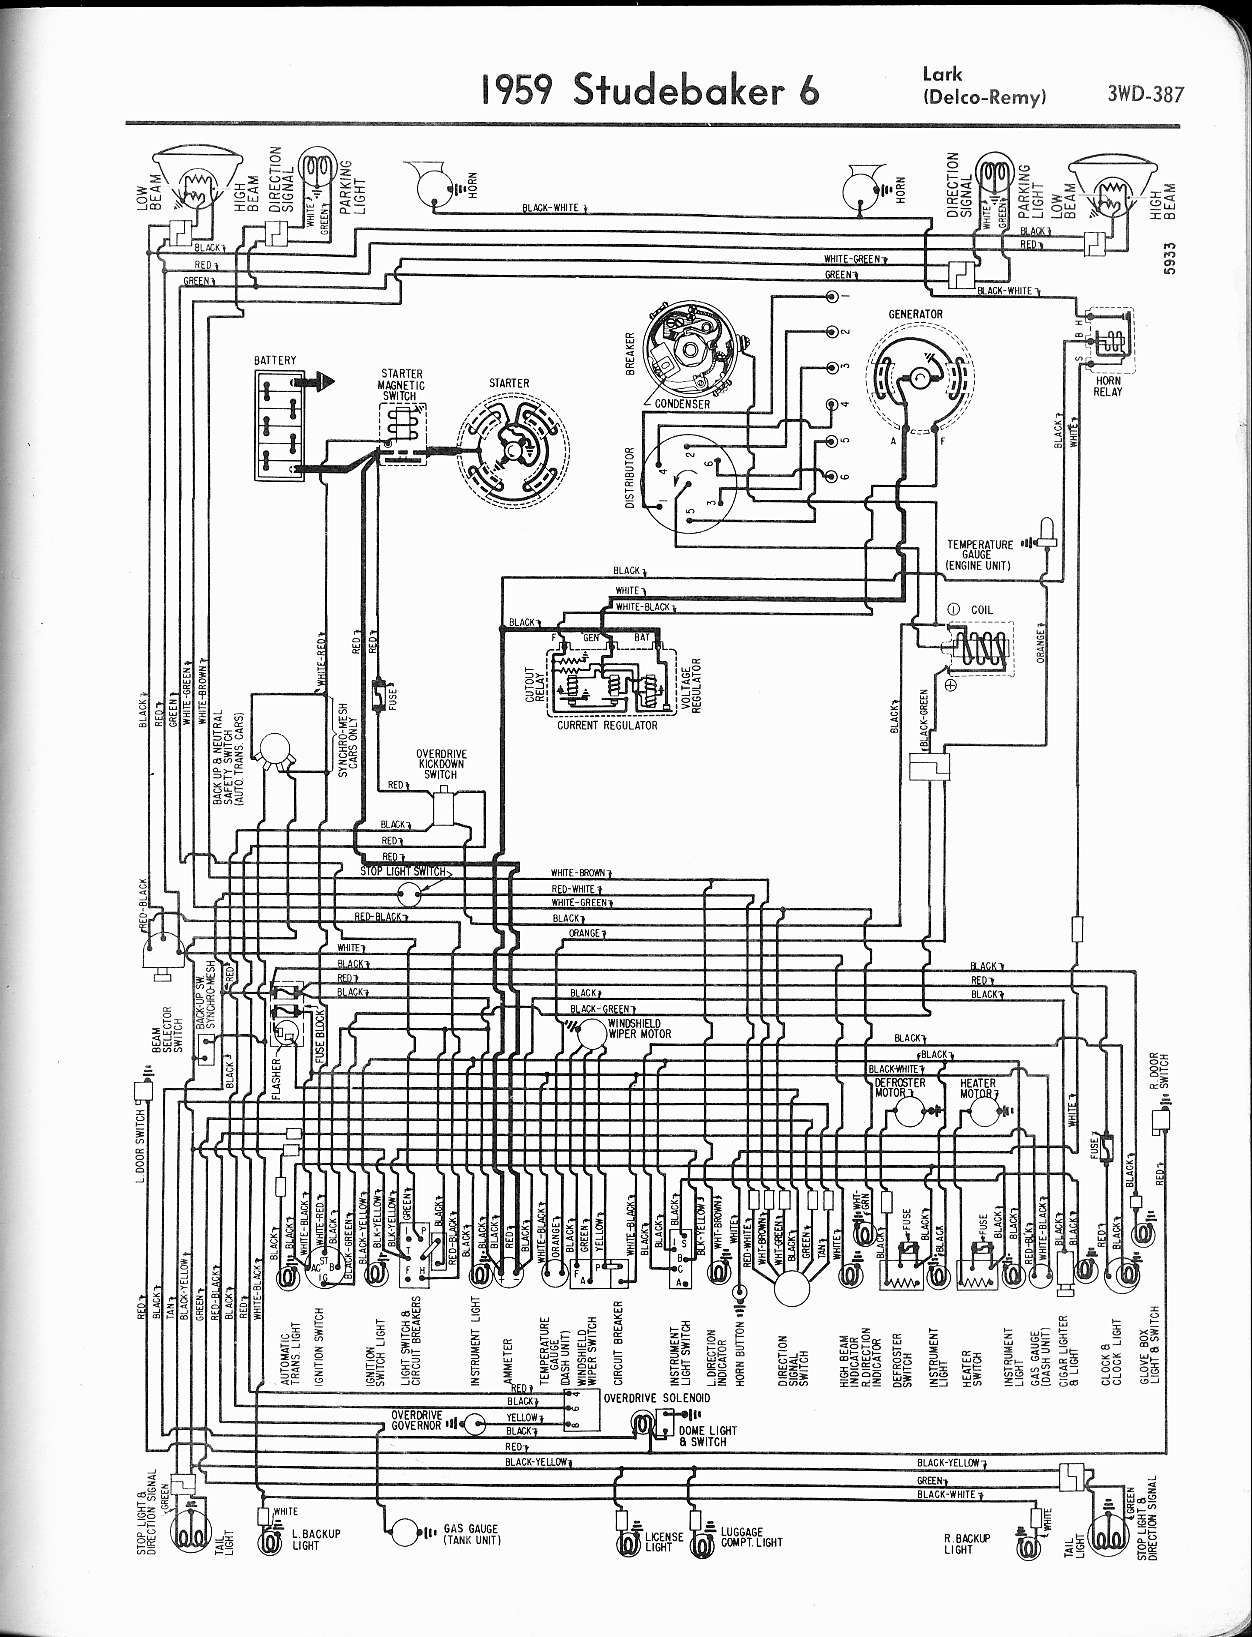 Studebaker wiring diagrams - The Old Car Manual Project 1953 ford truck wiring diagram 